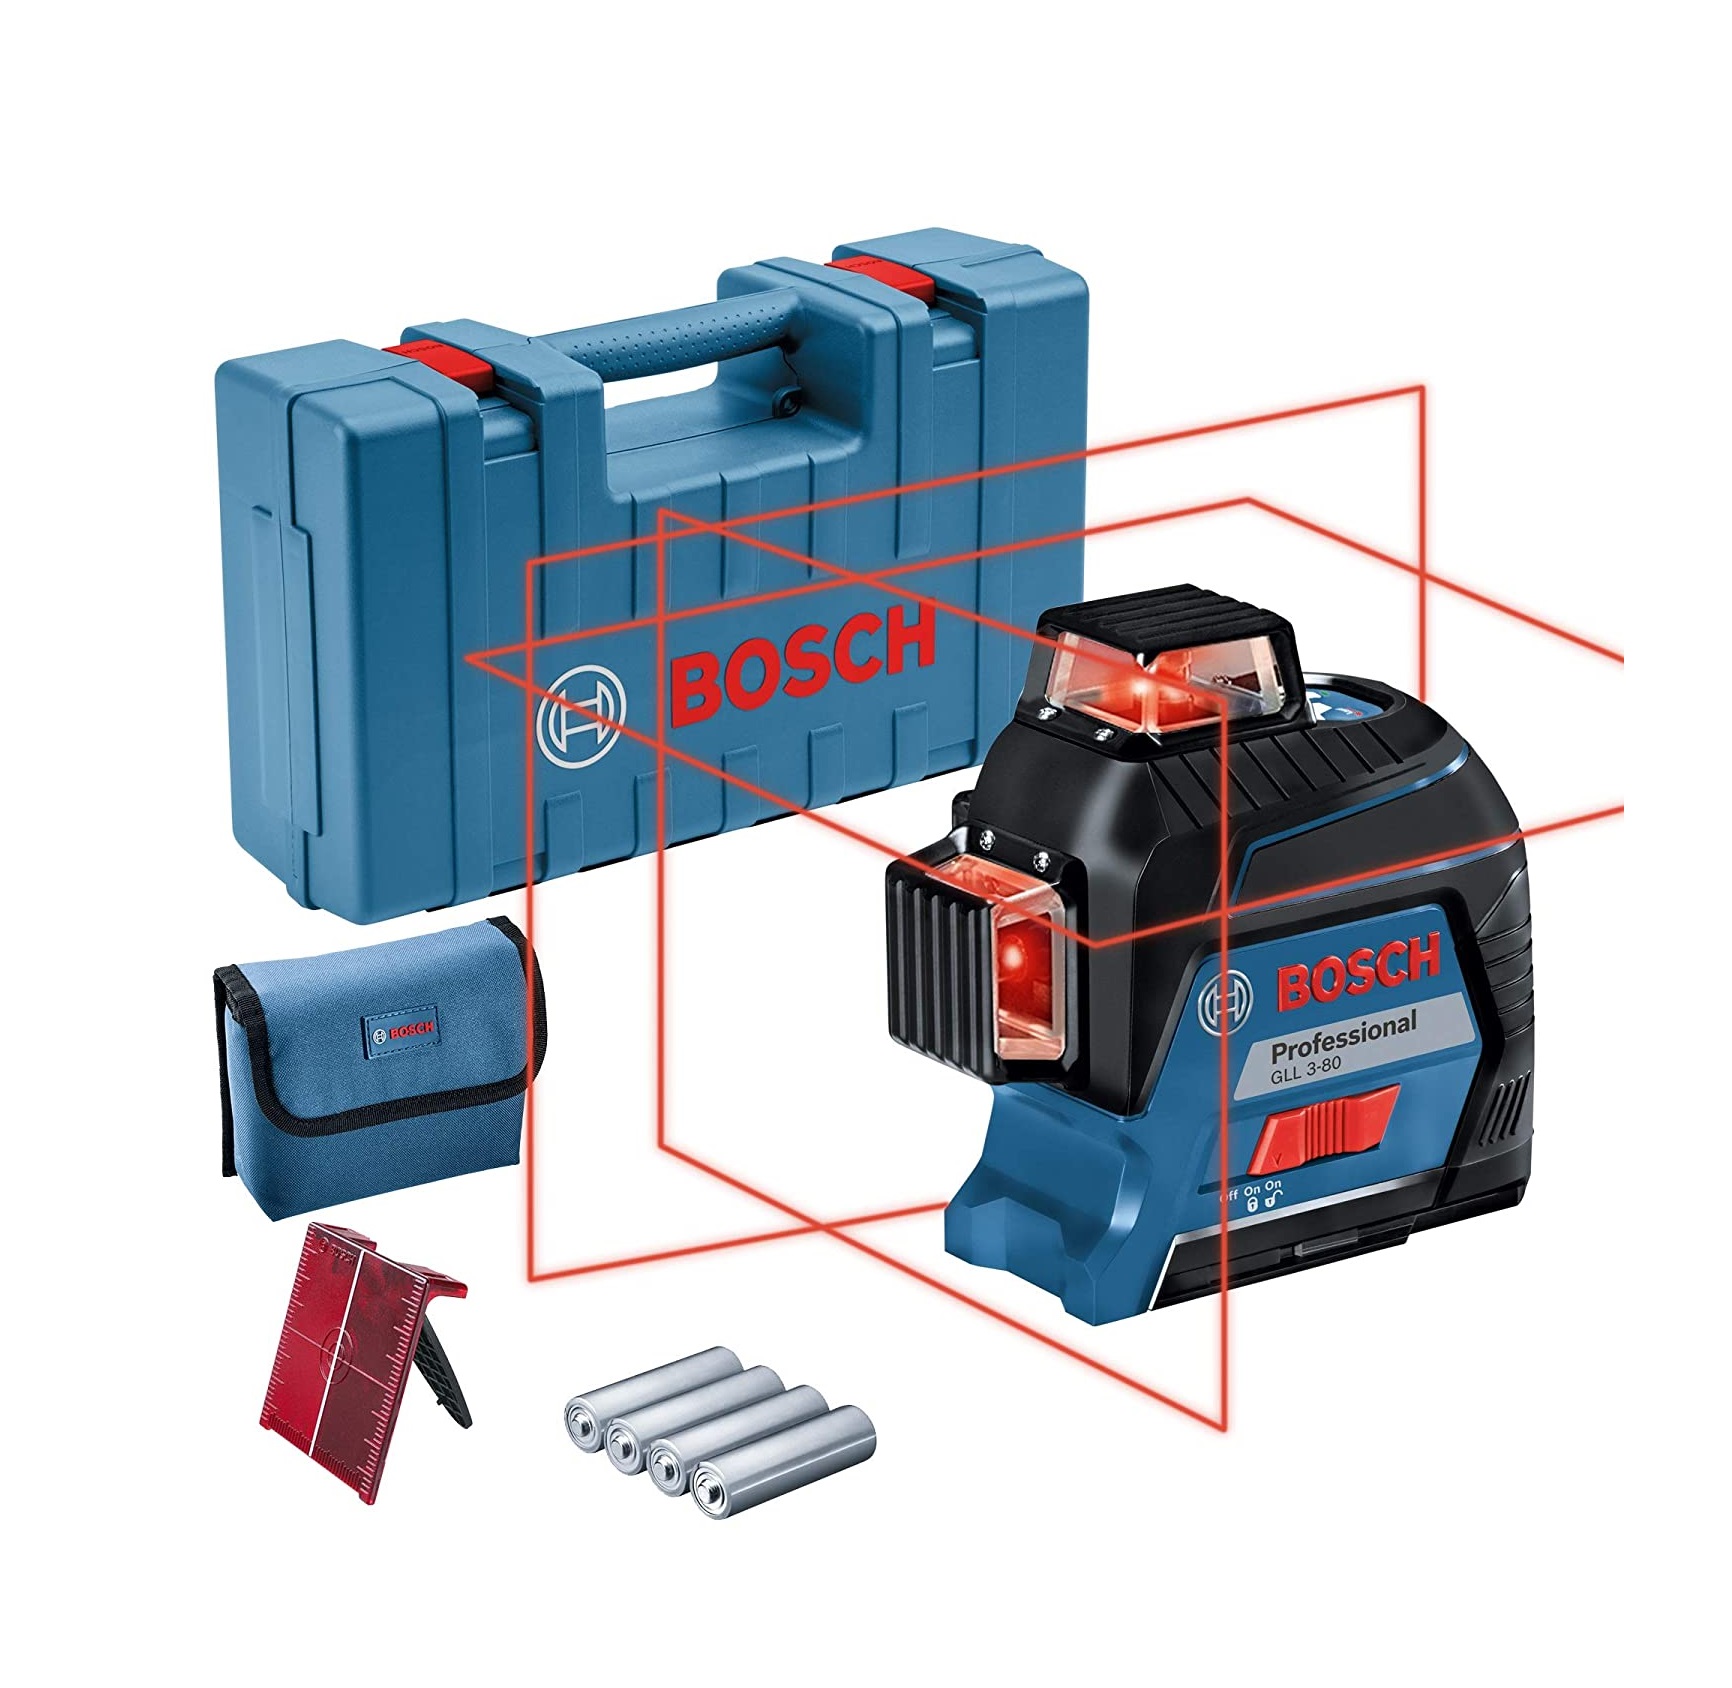 Bosch GLL 3-80 Professional Line Laser with Self Levelling 30m Range 120m Range with receiver, IP 54 (Blue)